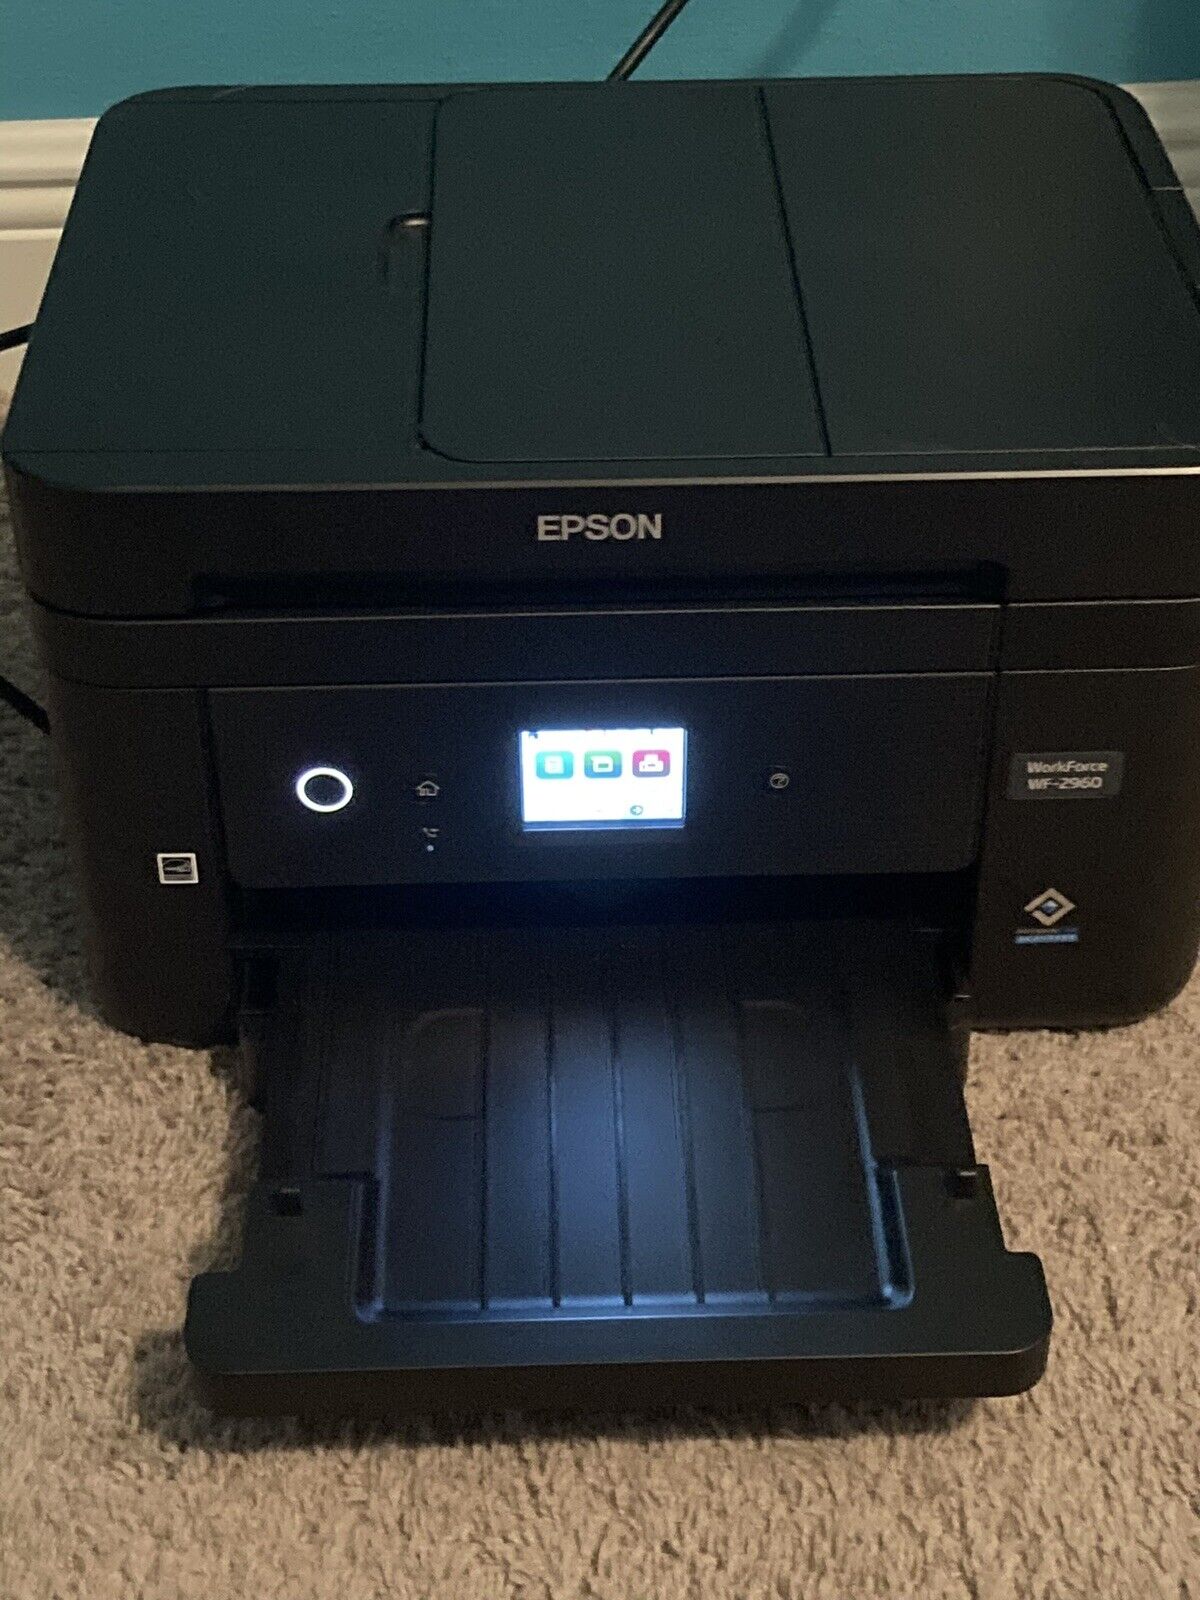 Epson WorkForce WF-2960 Color Inkjet All-In-One Printer. Great Condition